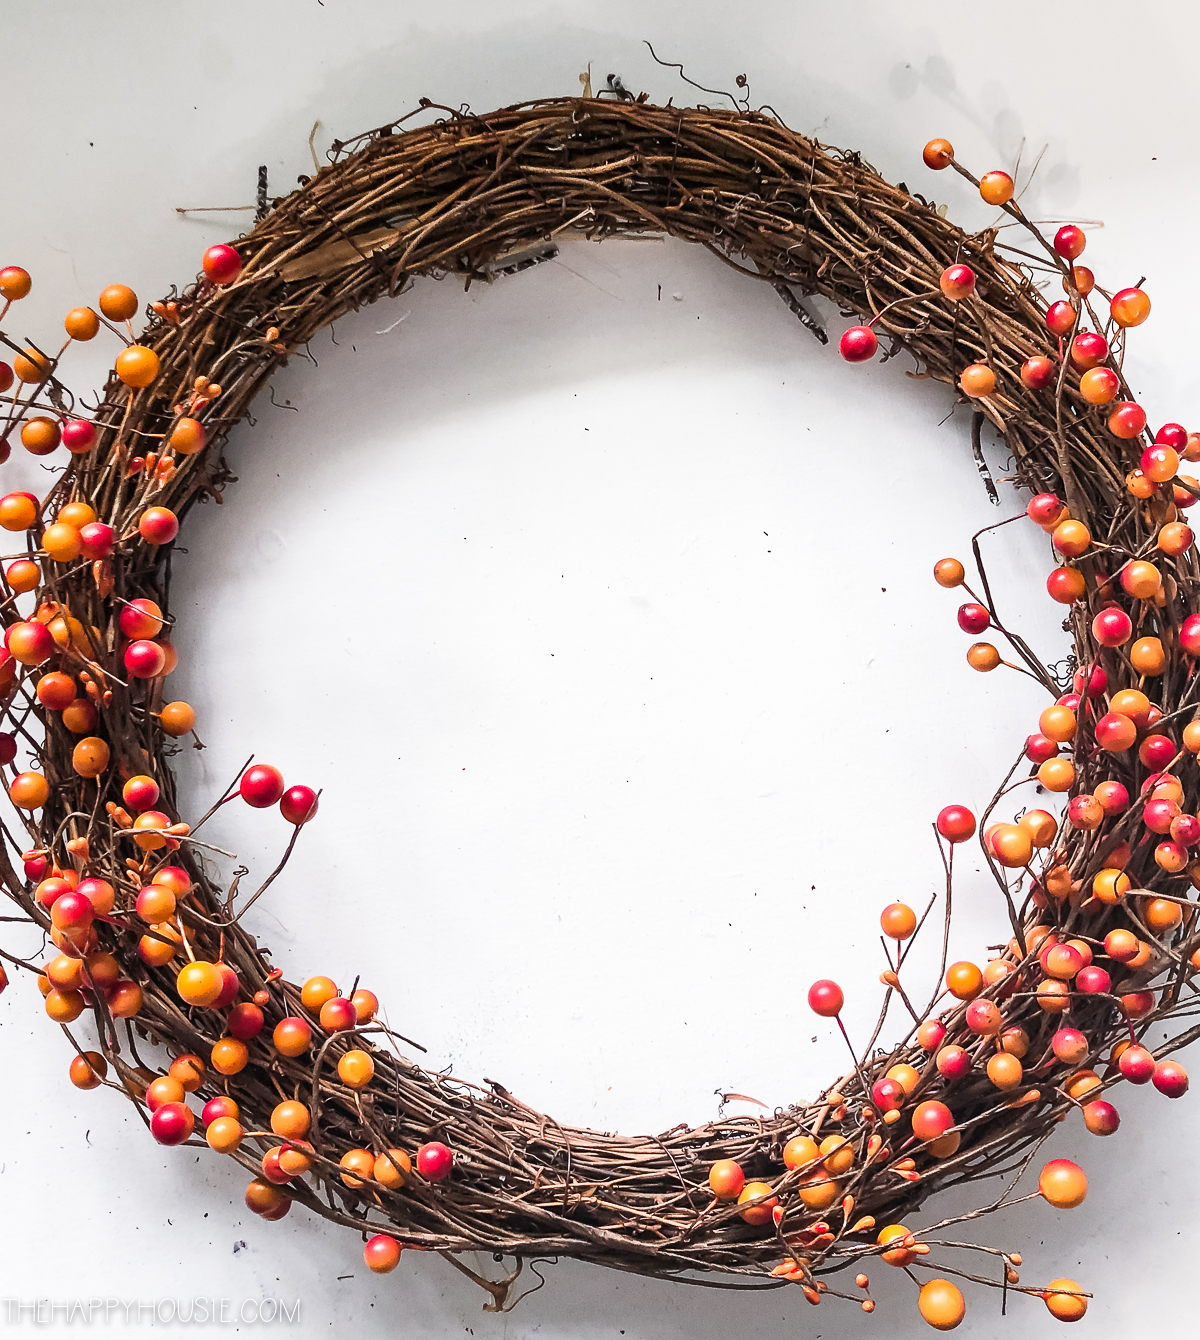 The berry branches winding up both sides of the wreath.